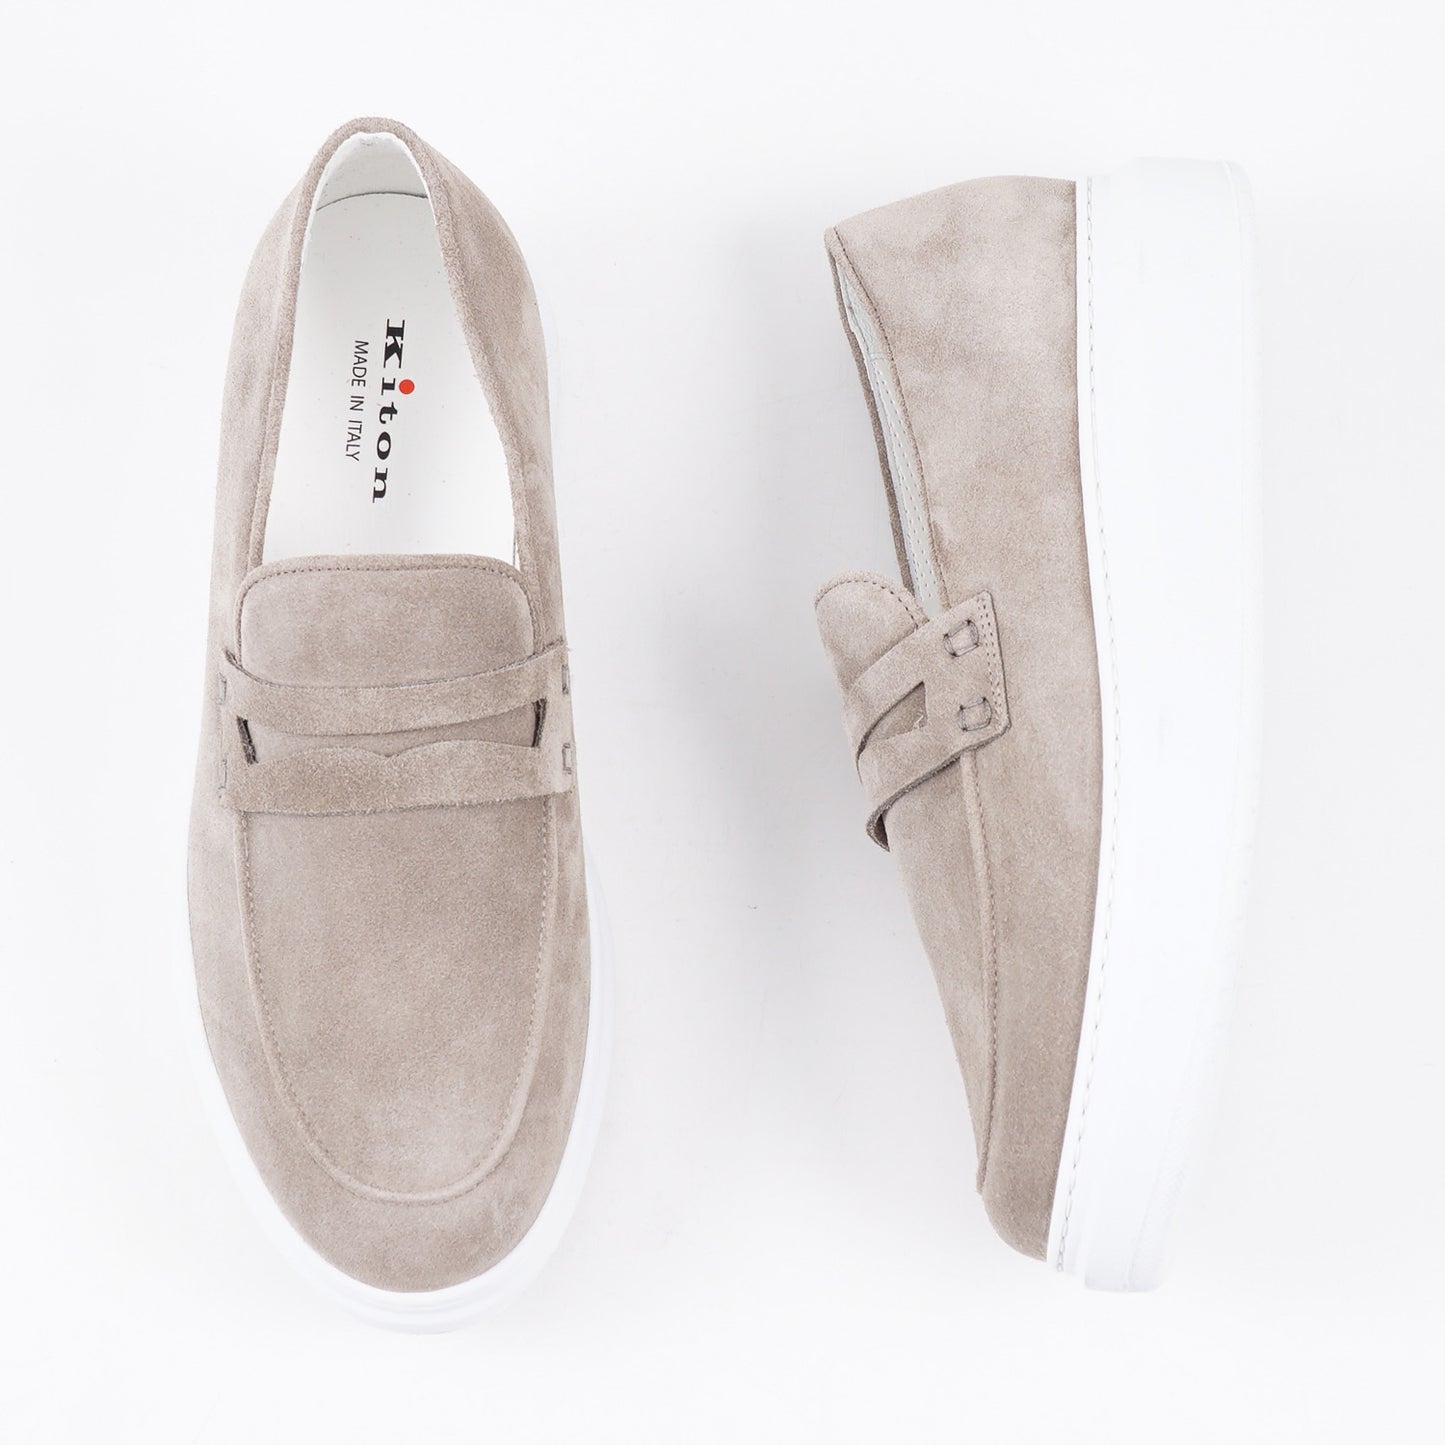 Kiton Casual Slip-On Suede Loafers - Top Shelf Apparel